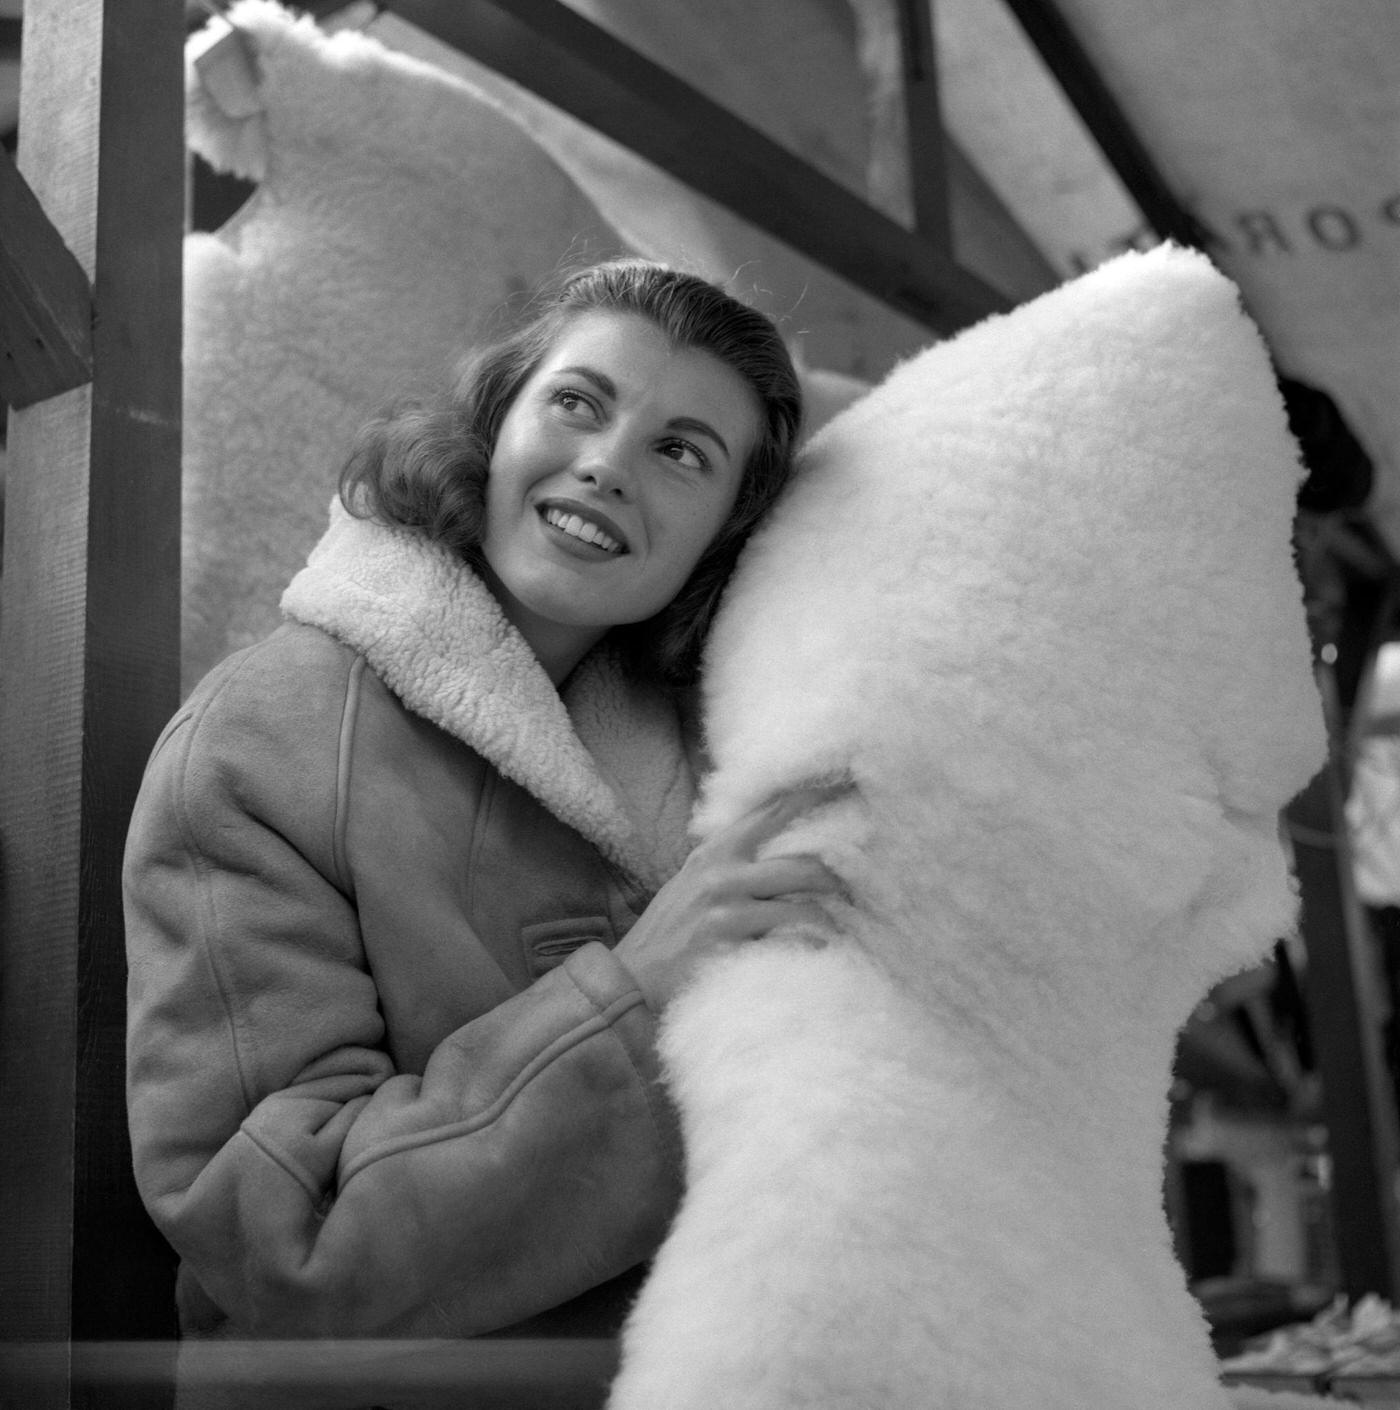 Miss United Kingdom, 23 year old Hilda Fairclough, who is spending the winter selling sheepskins for her father in Morecambe Market.